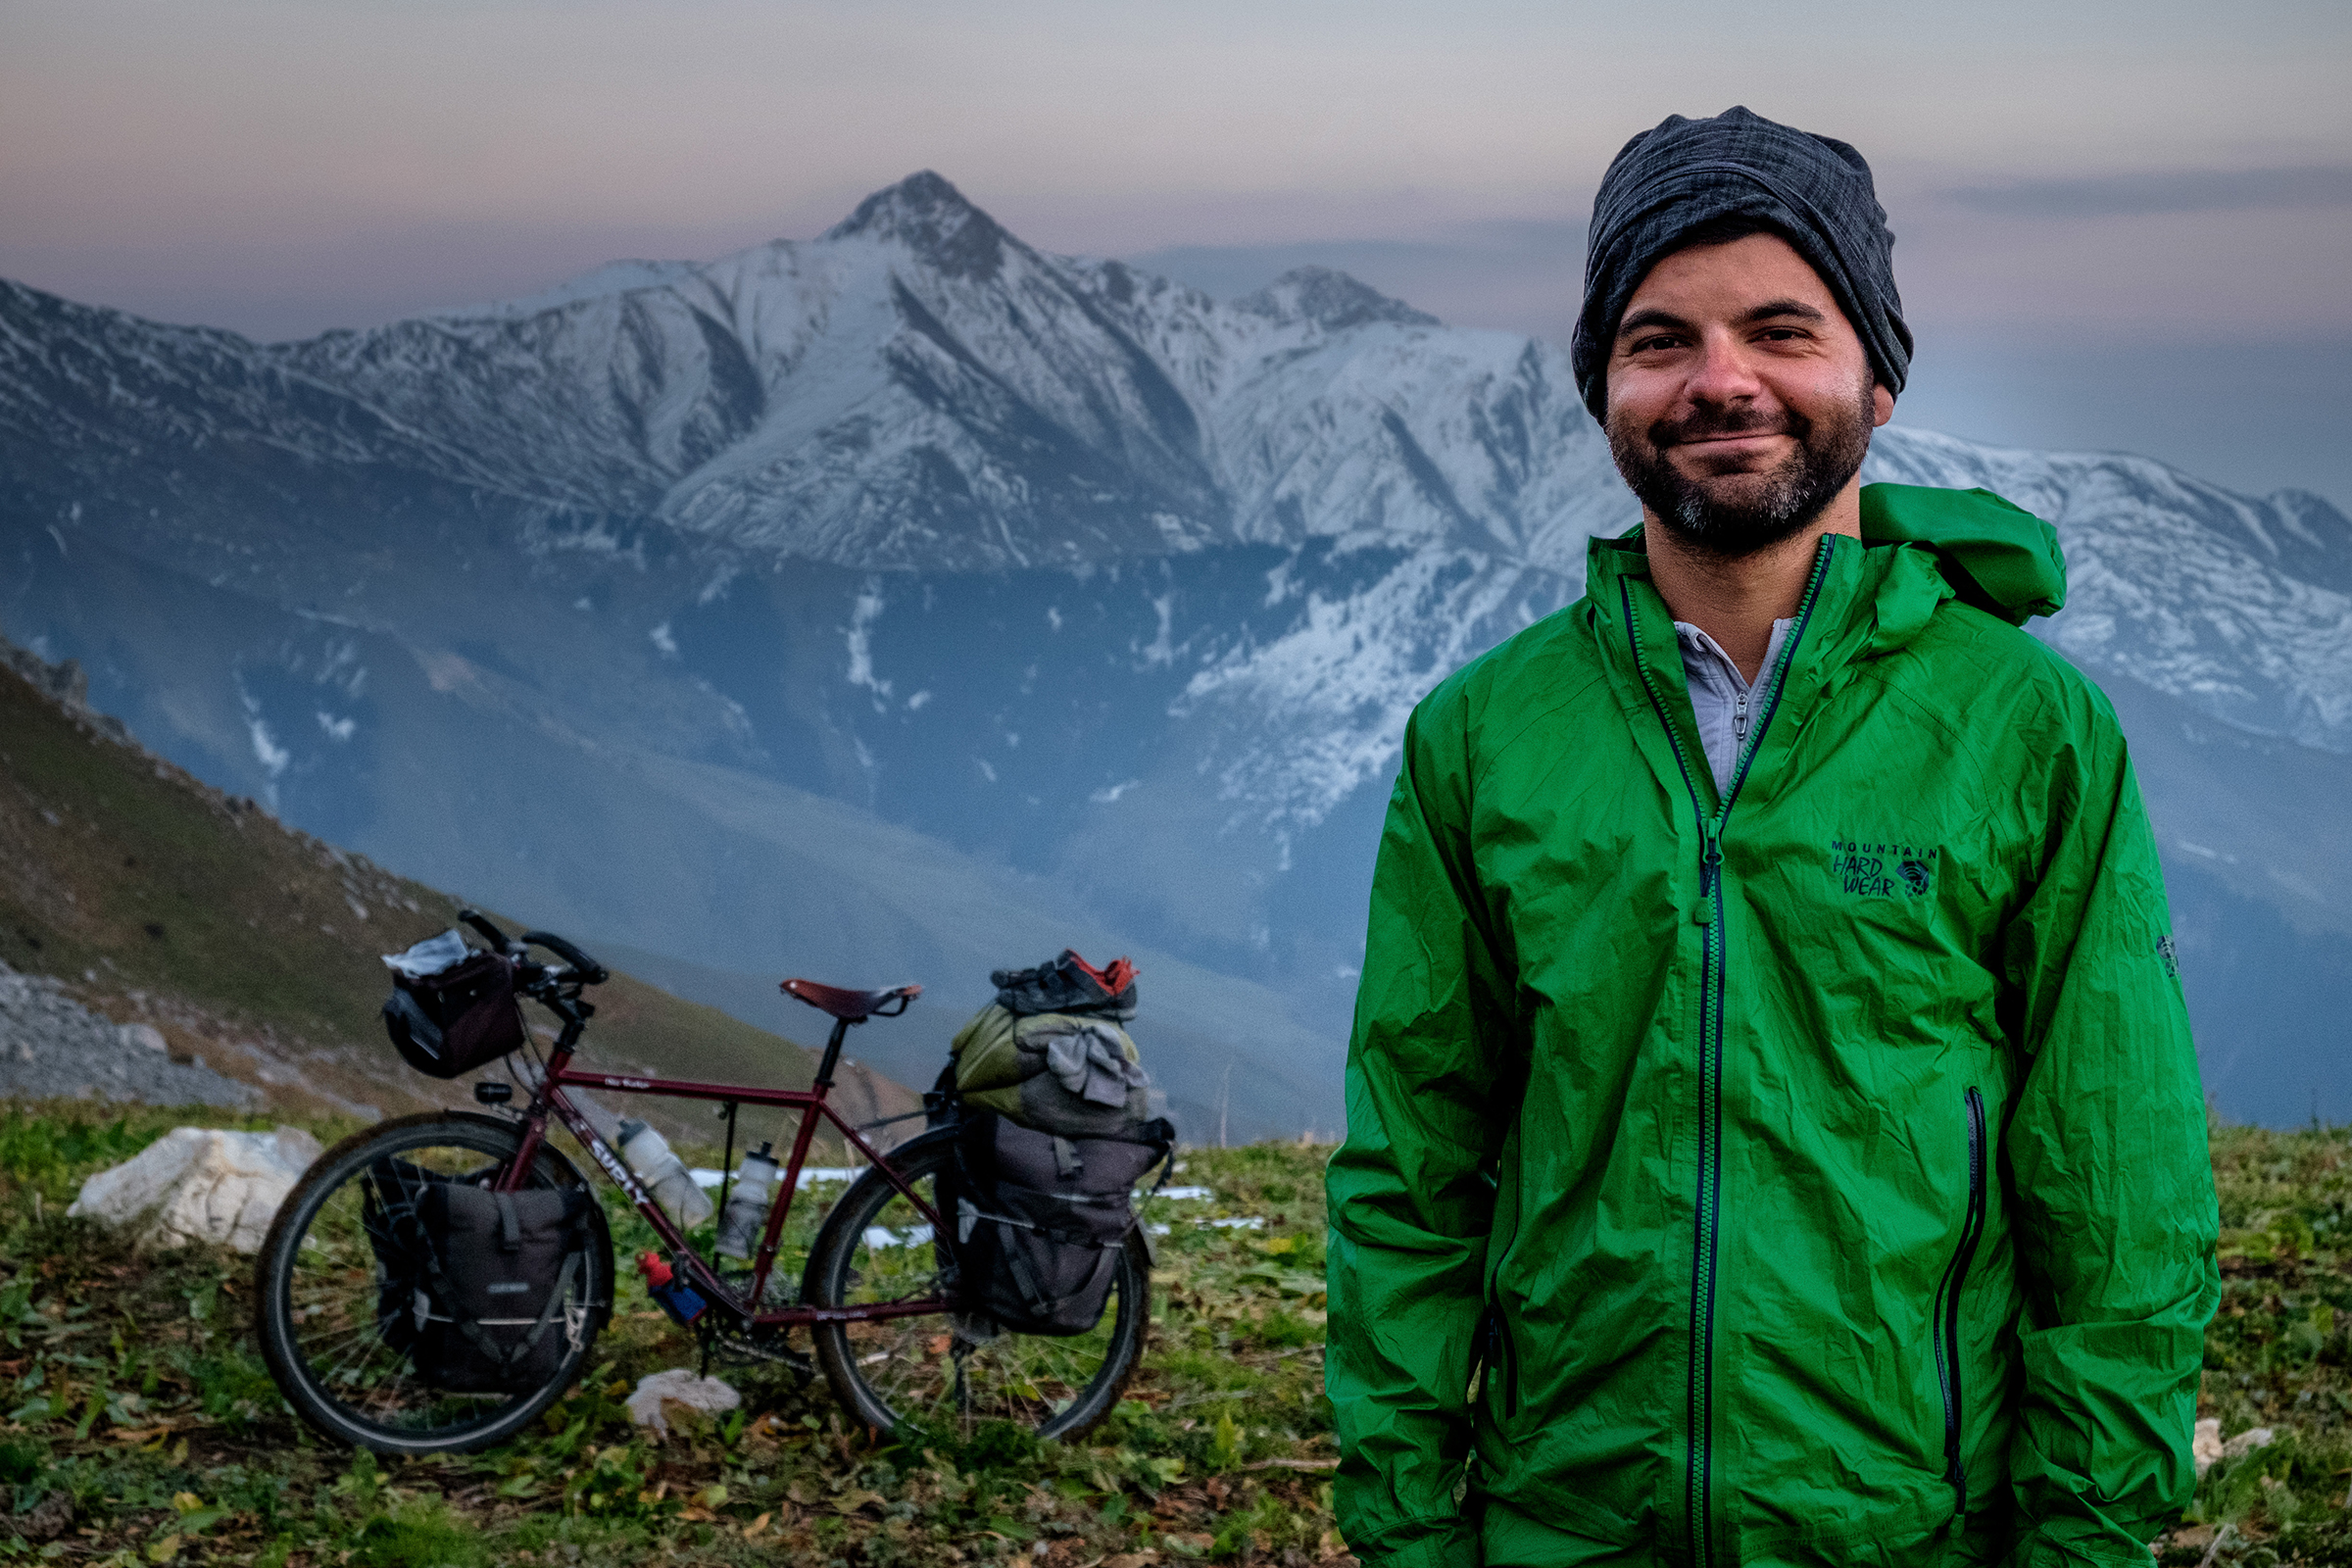 Jonathan standing in a beanie and green windbreaker with his bicycle and a mountain in the background.